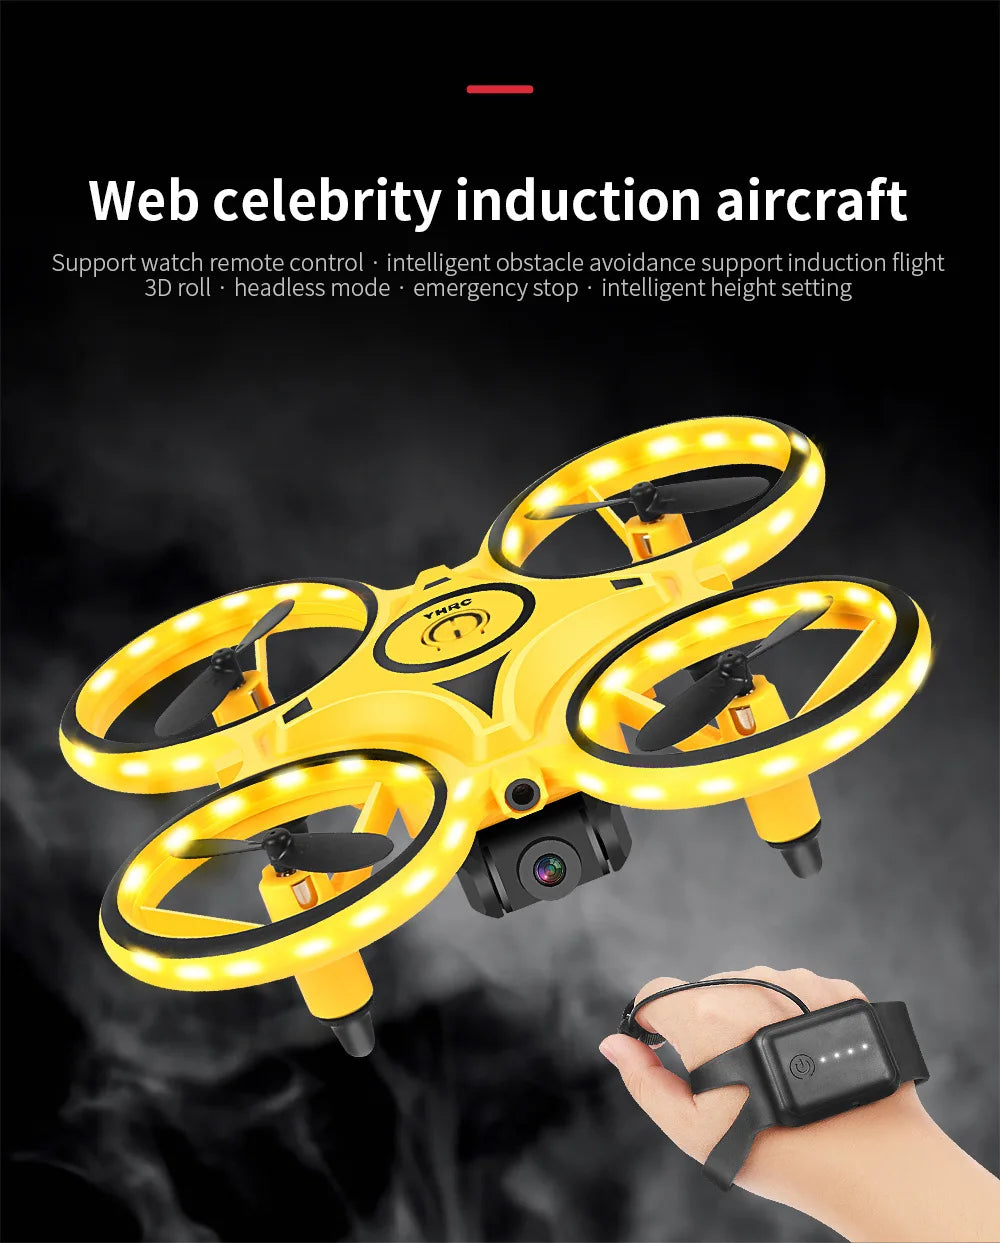 HGRC 2.4G Mini Watch RC Drone, Web celebrity induction aircraft Support watch remote control intelligent obstacle avoidance support induction flight 3D